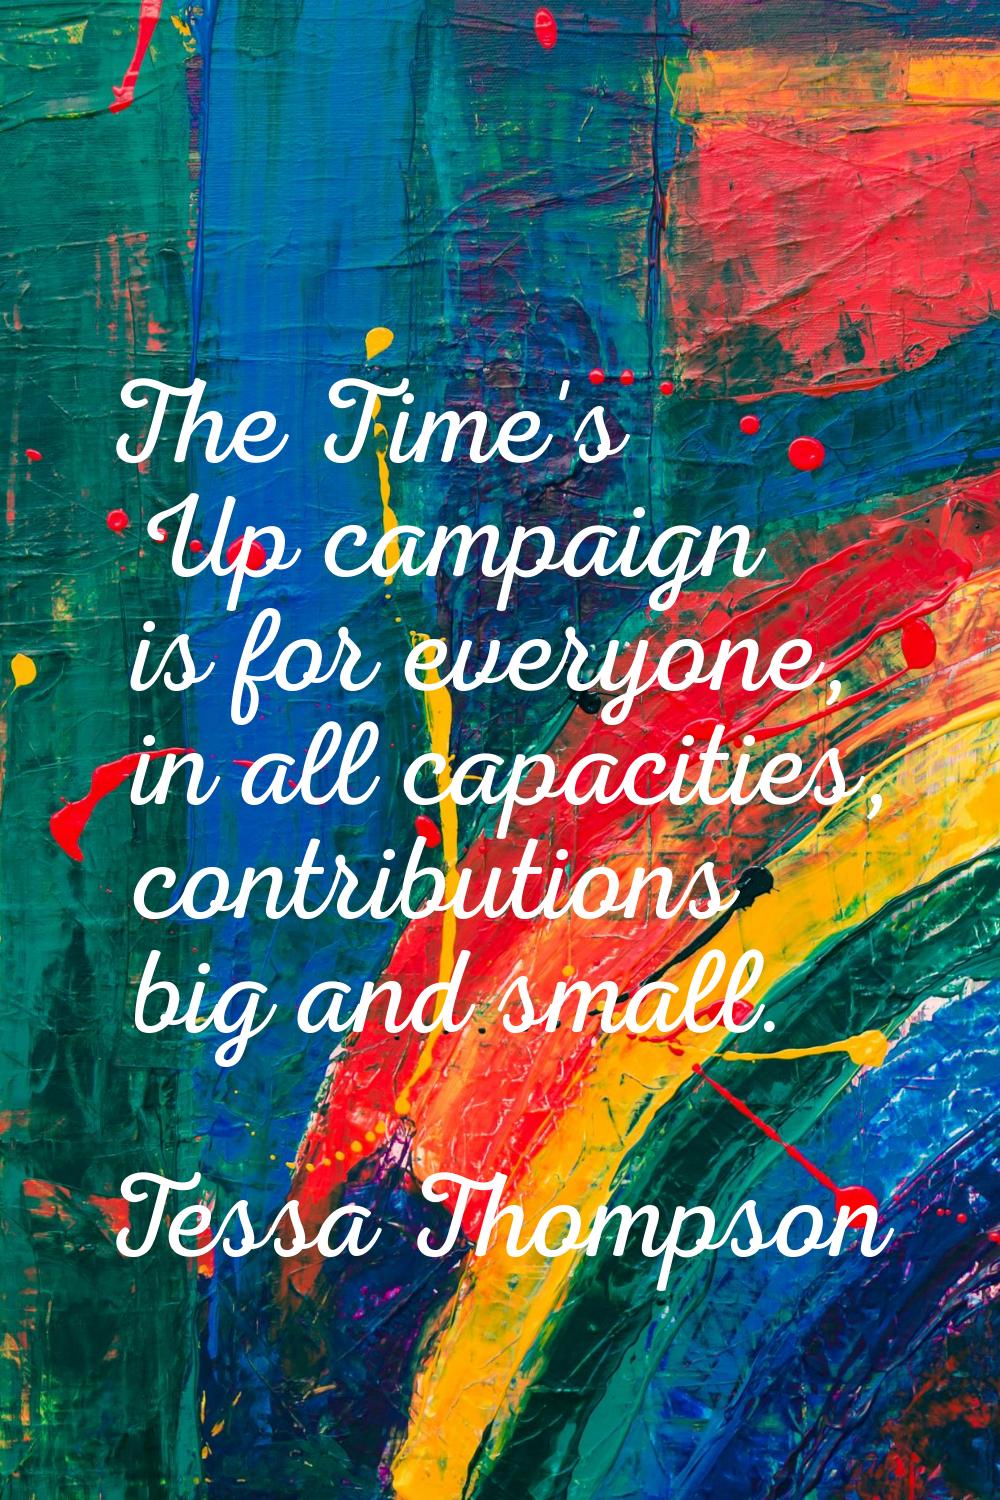 The Time's Up campaign is for everyone, in all capacities, contributions big and small.